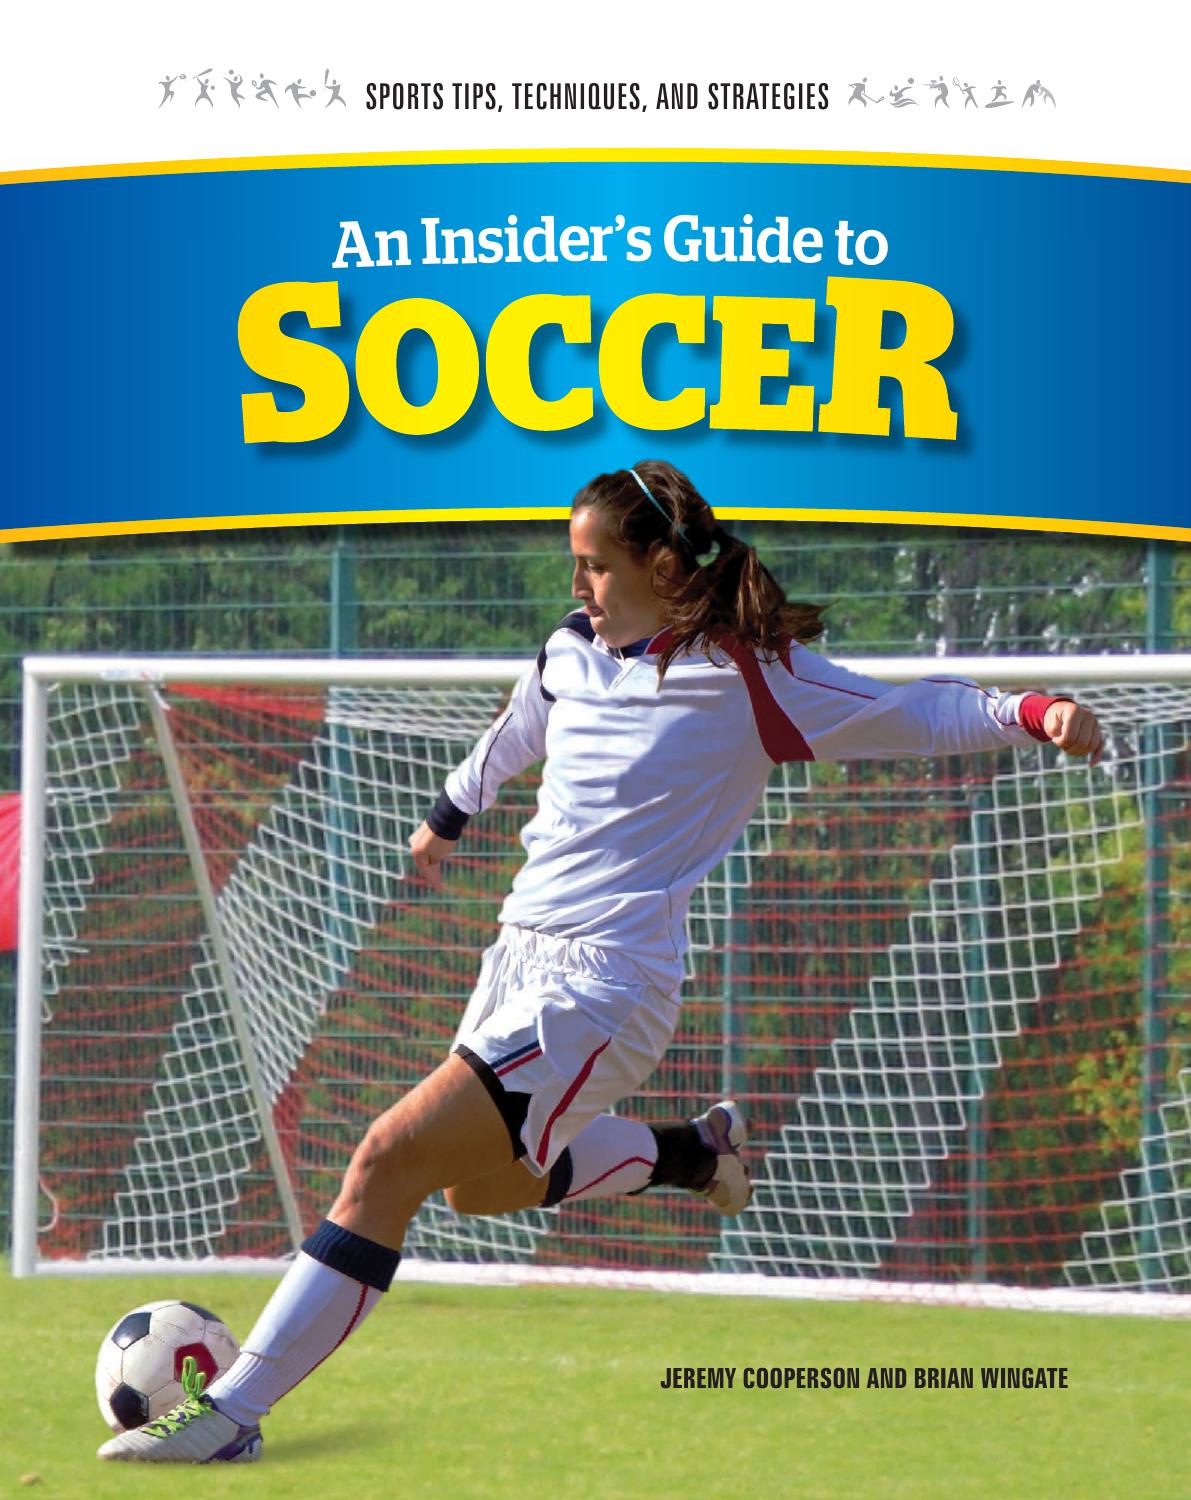 An Insider's Guide to Soccer by Jeremy Cooperson; Brian Wingate